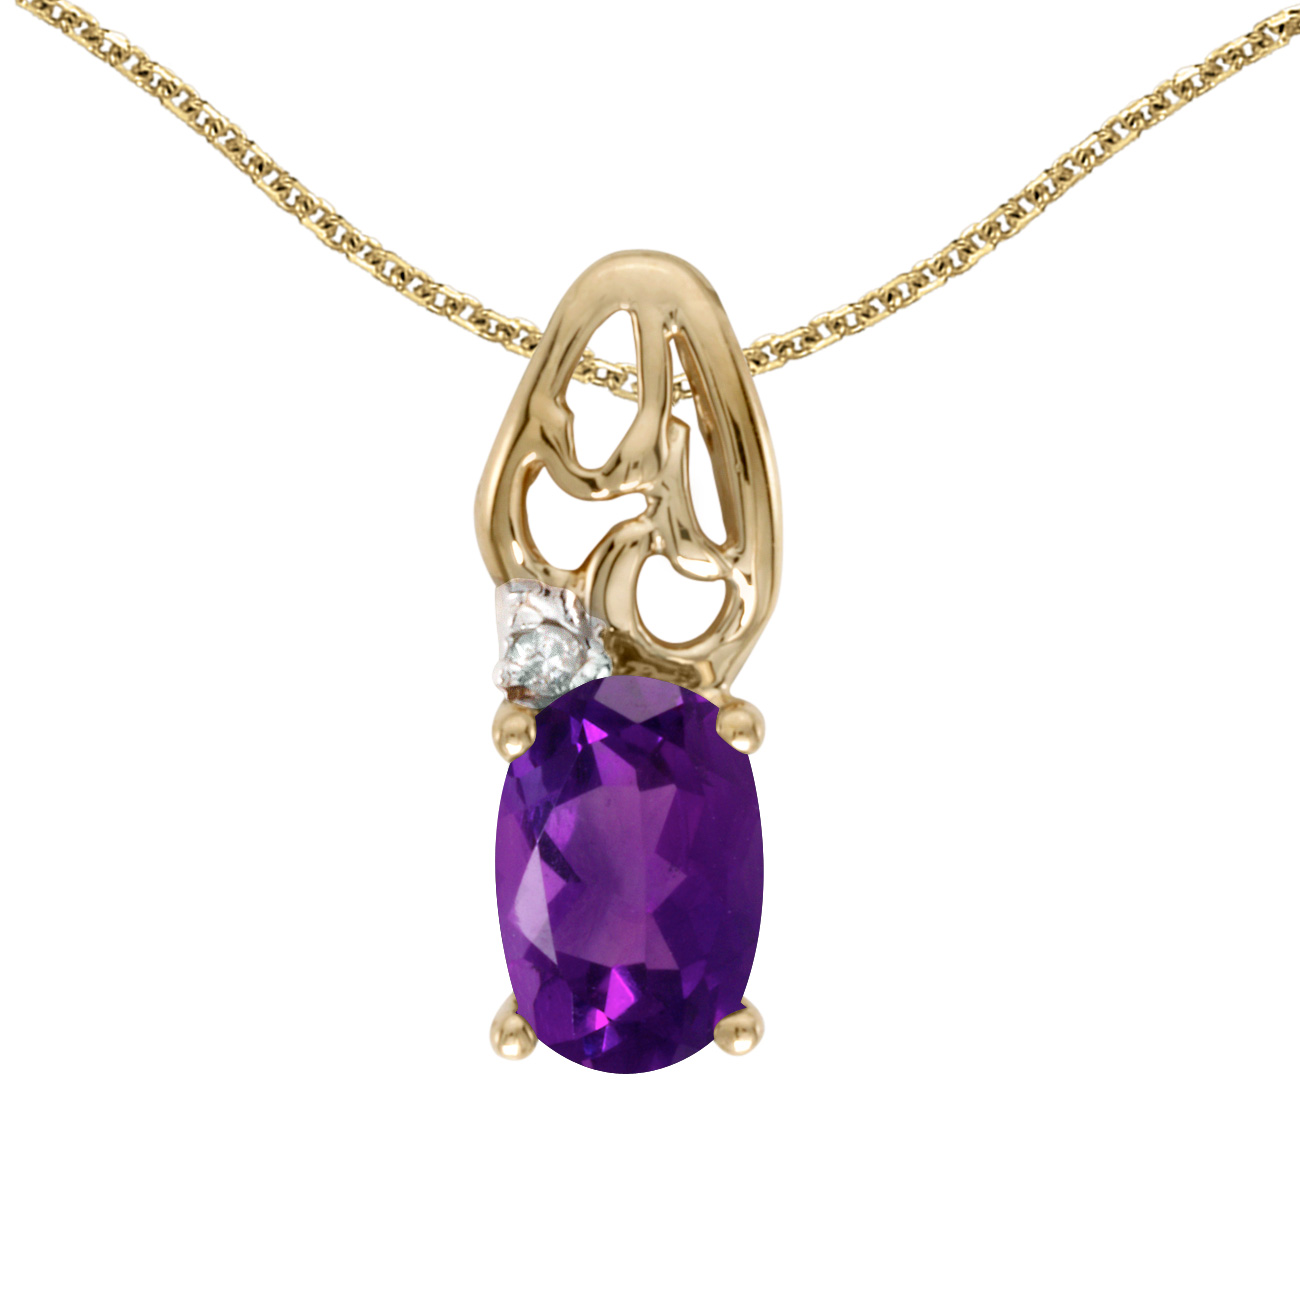 DIRECT-JEWELRY DON'T FORGET THE DASH 14k Yellow Gold Oval Amethyst And Diamond Pendant with 18" Chain